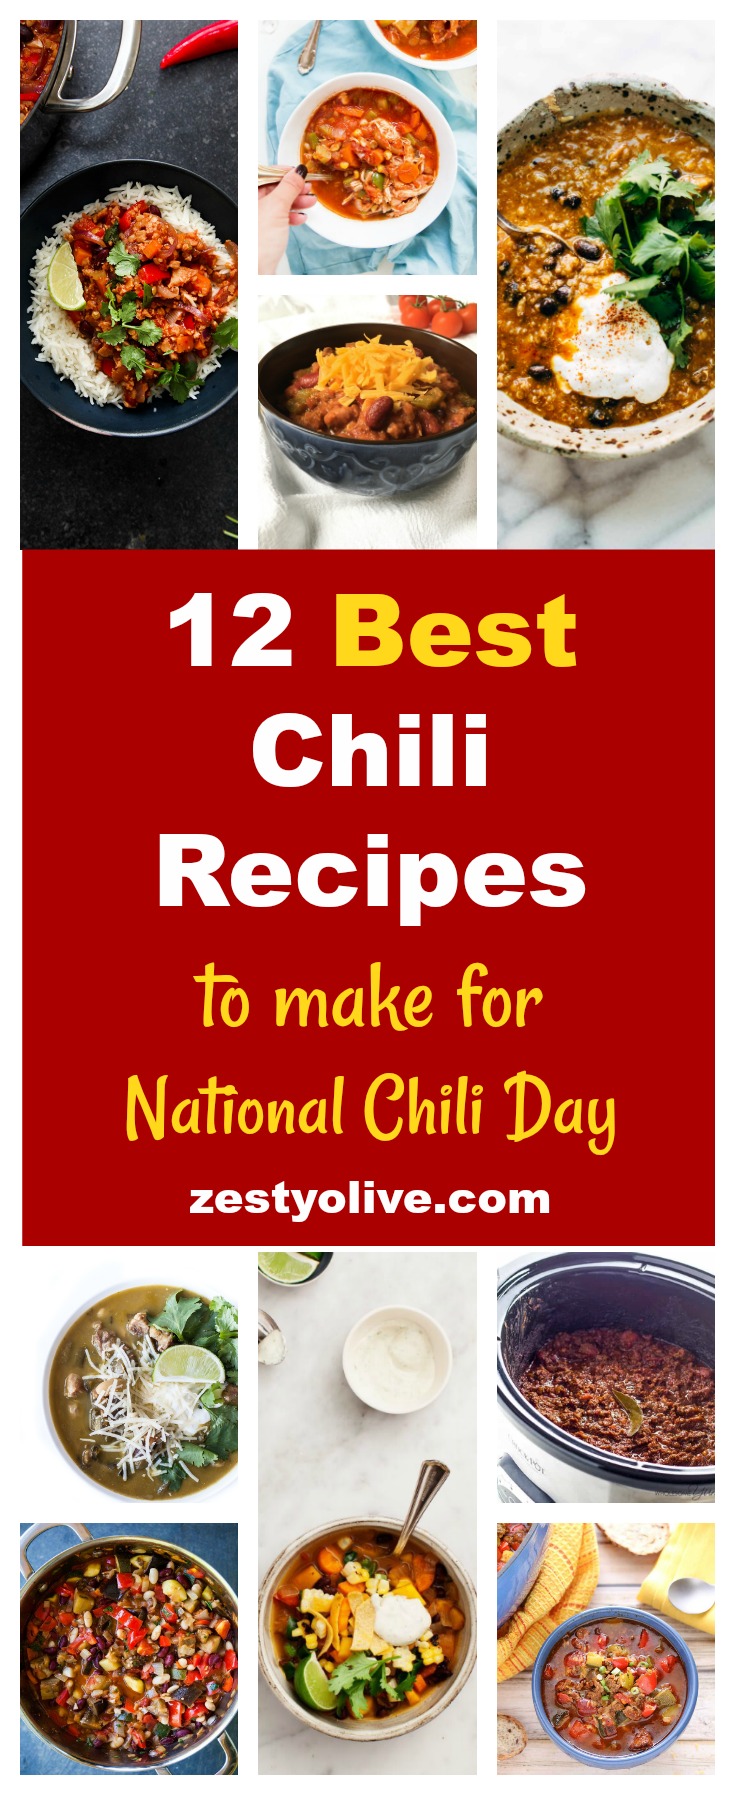 In celebration of National Chili Day, here are 12 of the best chili recipes to consider for your celebration of this day and beyond. Whether you're looking for beef, turkey, pork, vegetarian, keto, easy, slow cooker, dutch oven, or instant pot varieties of chili, you're sure to find one that fits your needs right here.